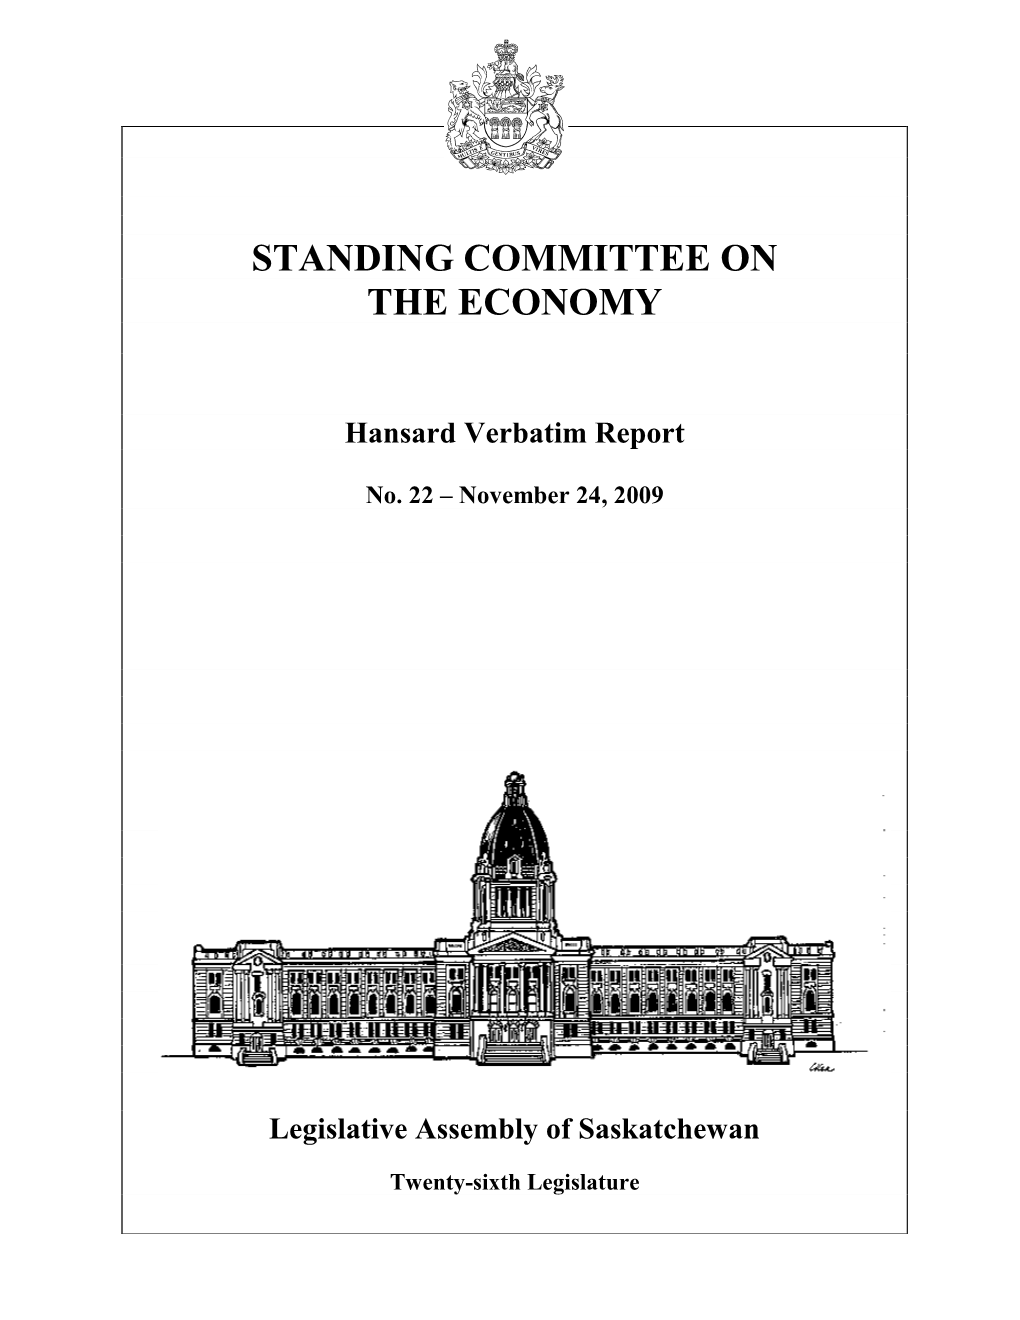 Standing Committee on the Economy